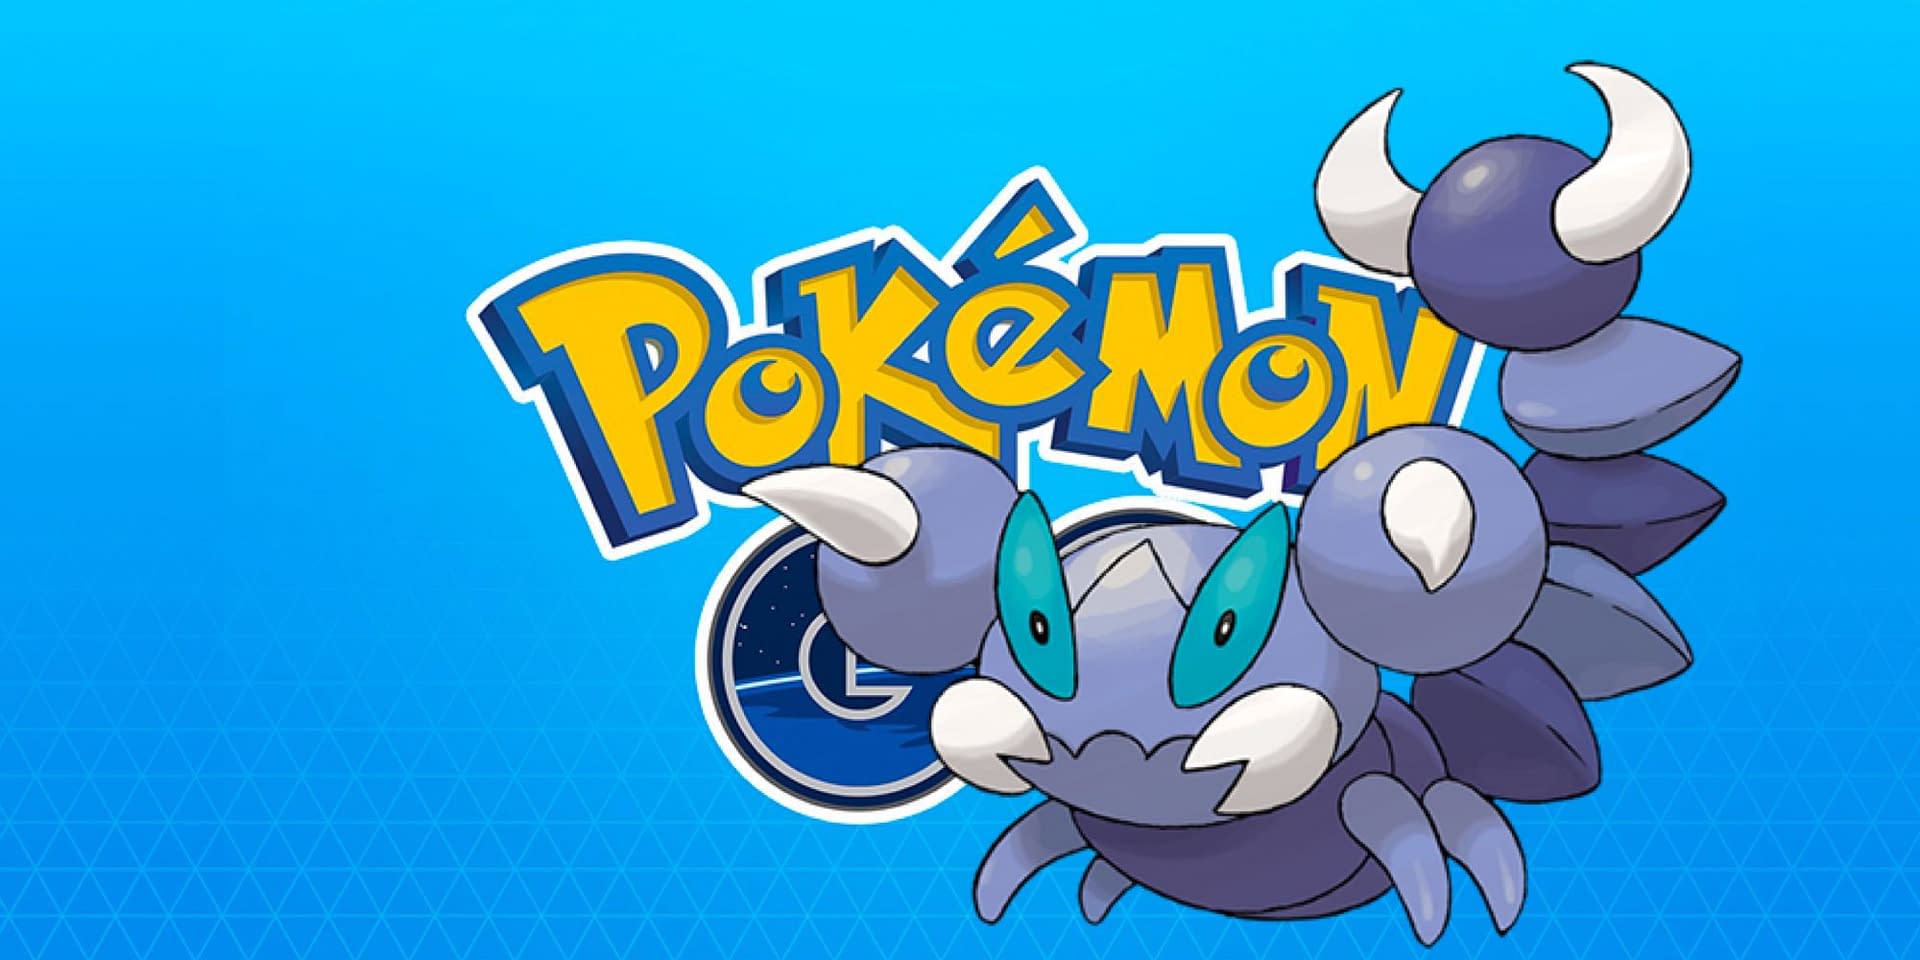 Raid Hour event featuring Regigigas and Shiny Regigigas available in  Pokémon GO today, May 24, from 6 p.m. to 7 p.m. local time